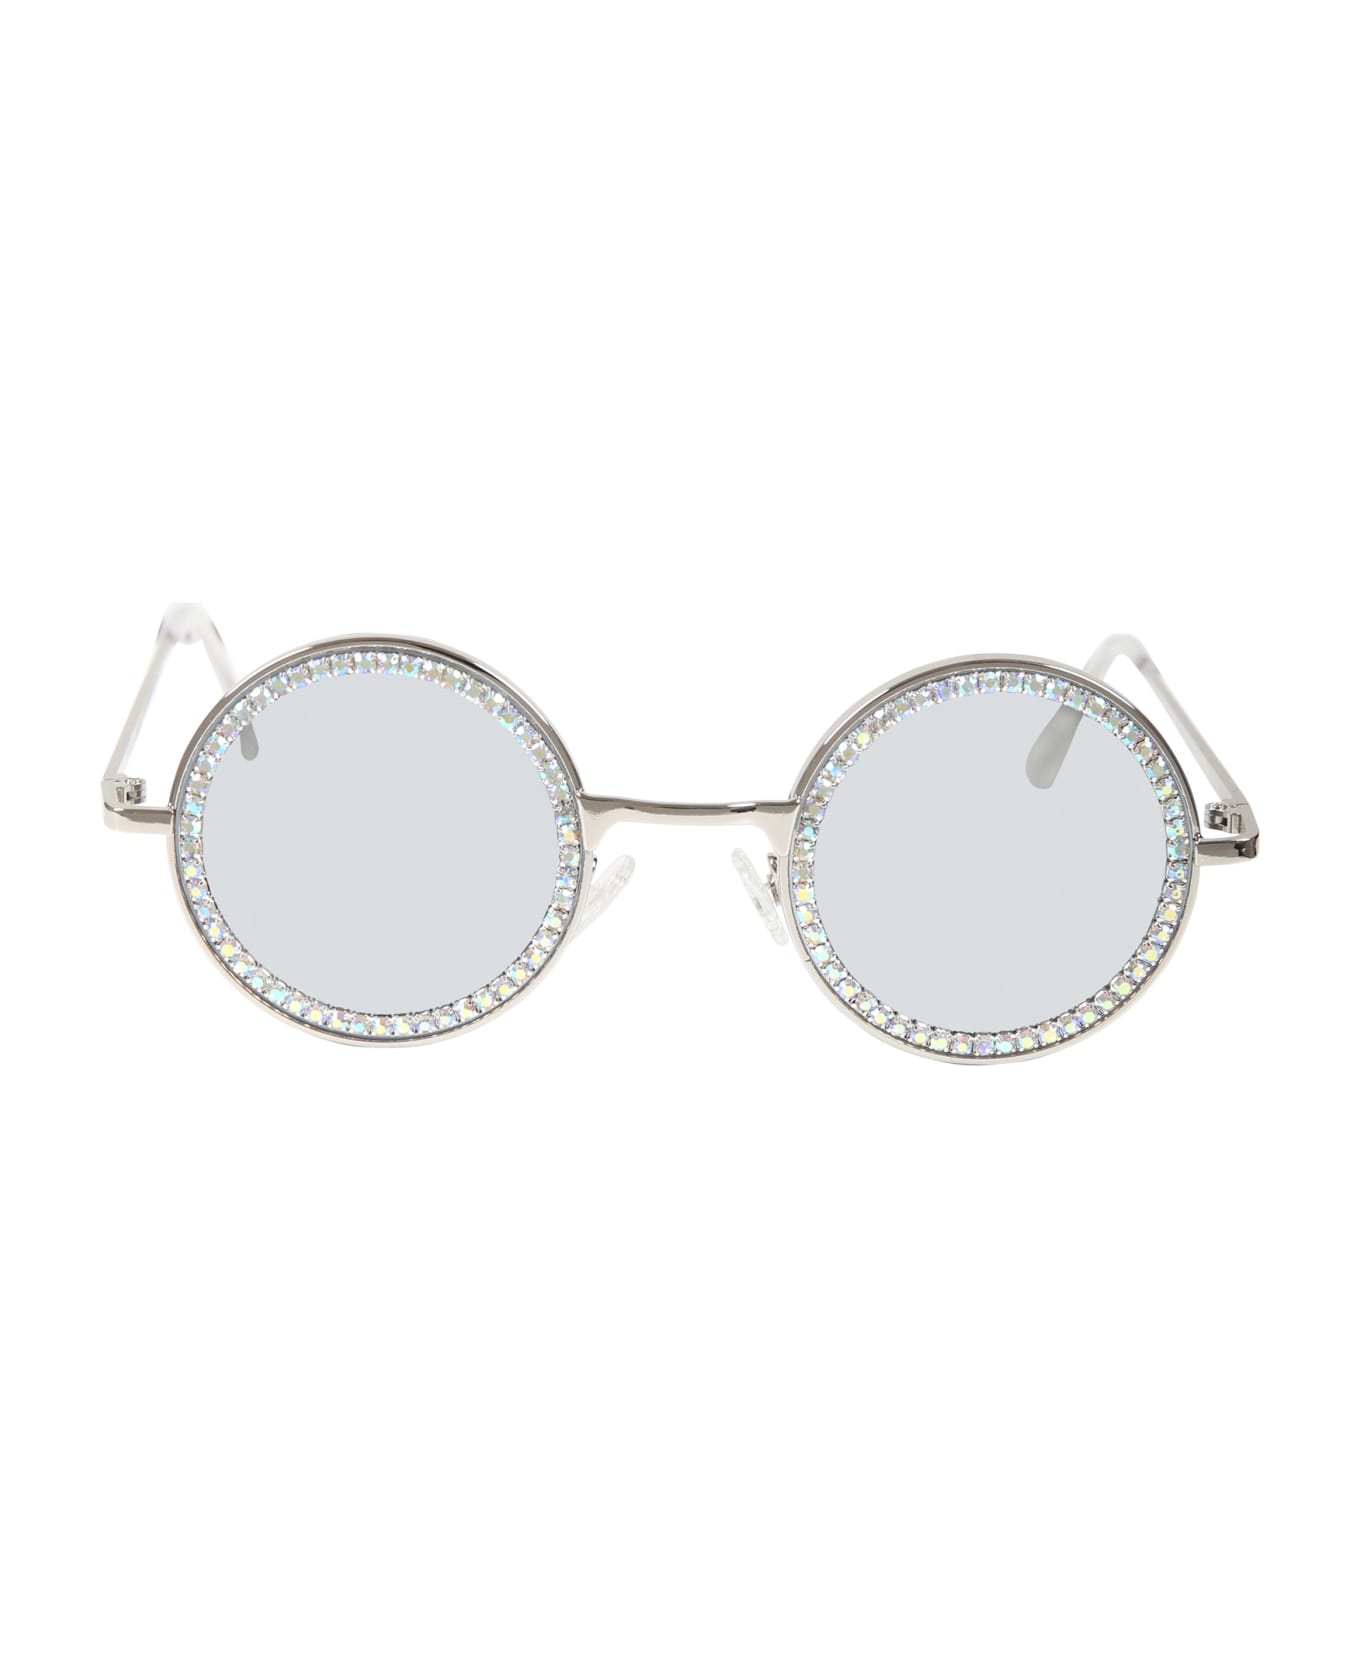 Monnalisa Silver Glasses For Girl With Rhinestones - Silver アクセサリー＆ギフト